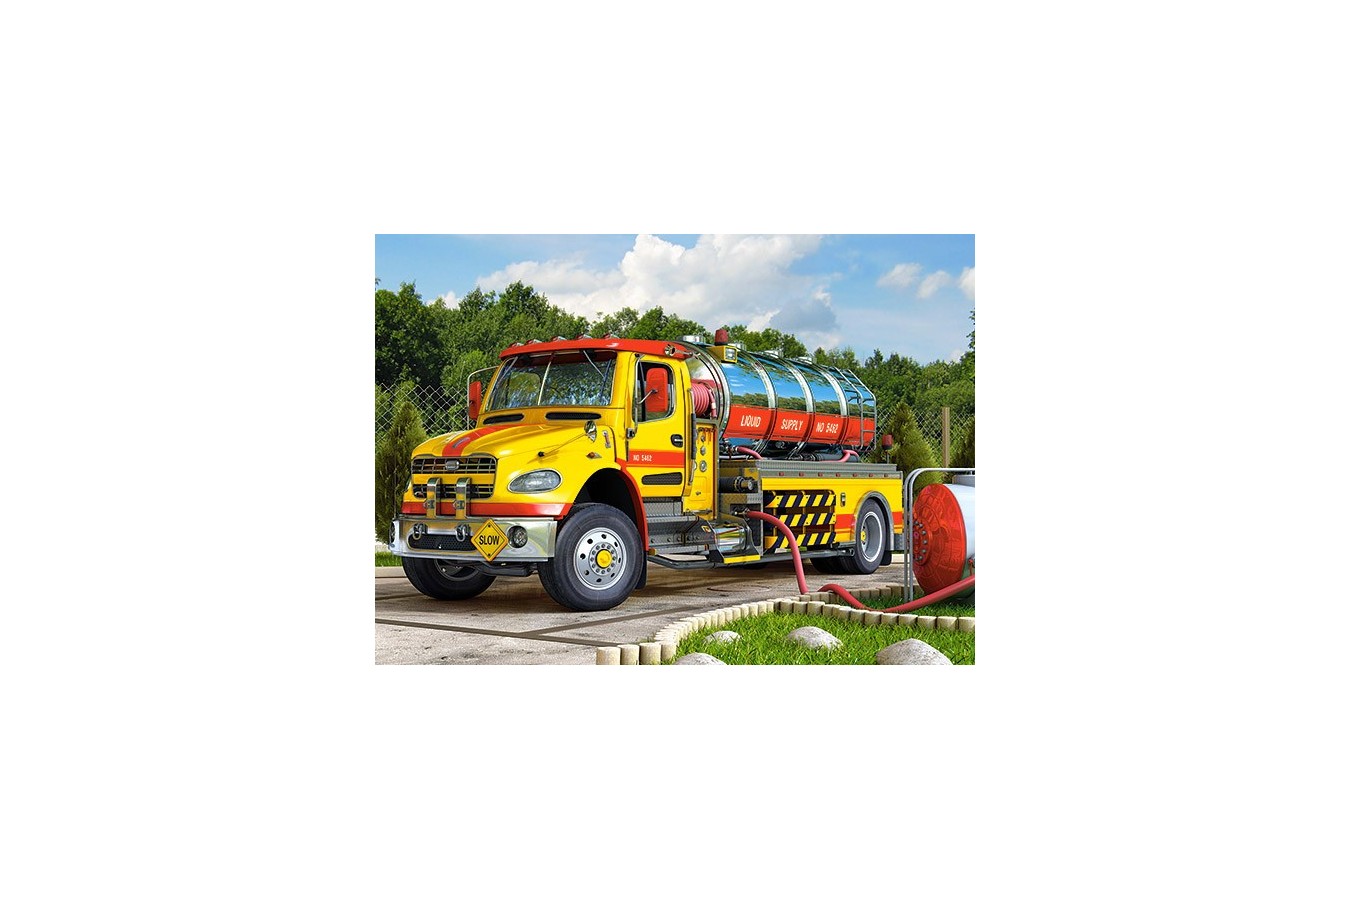 Puzzle Castorland - Tanker Truck, 120 Piese